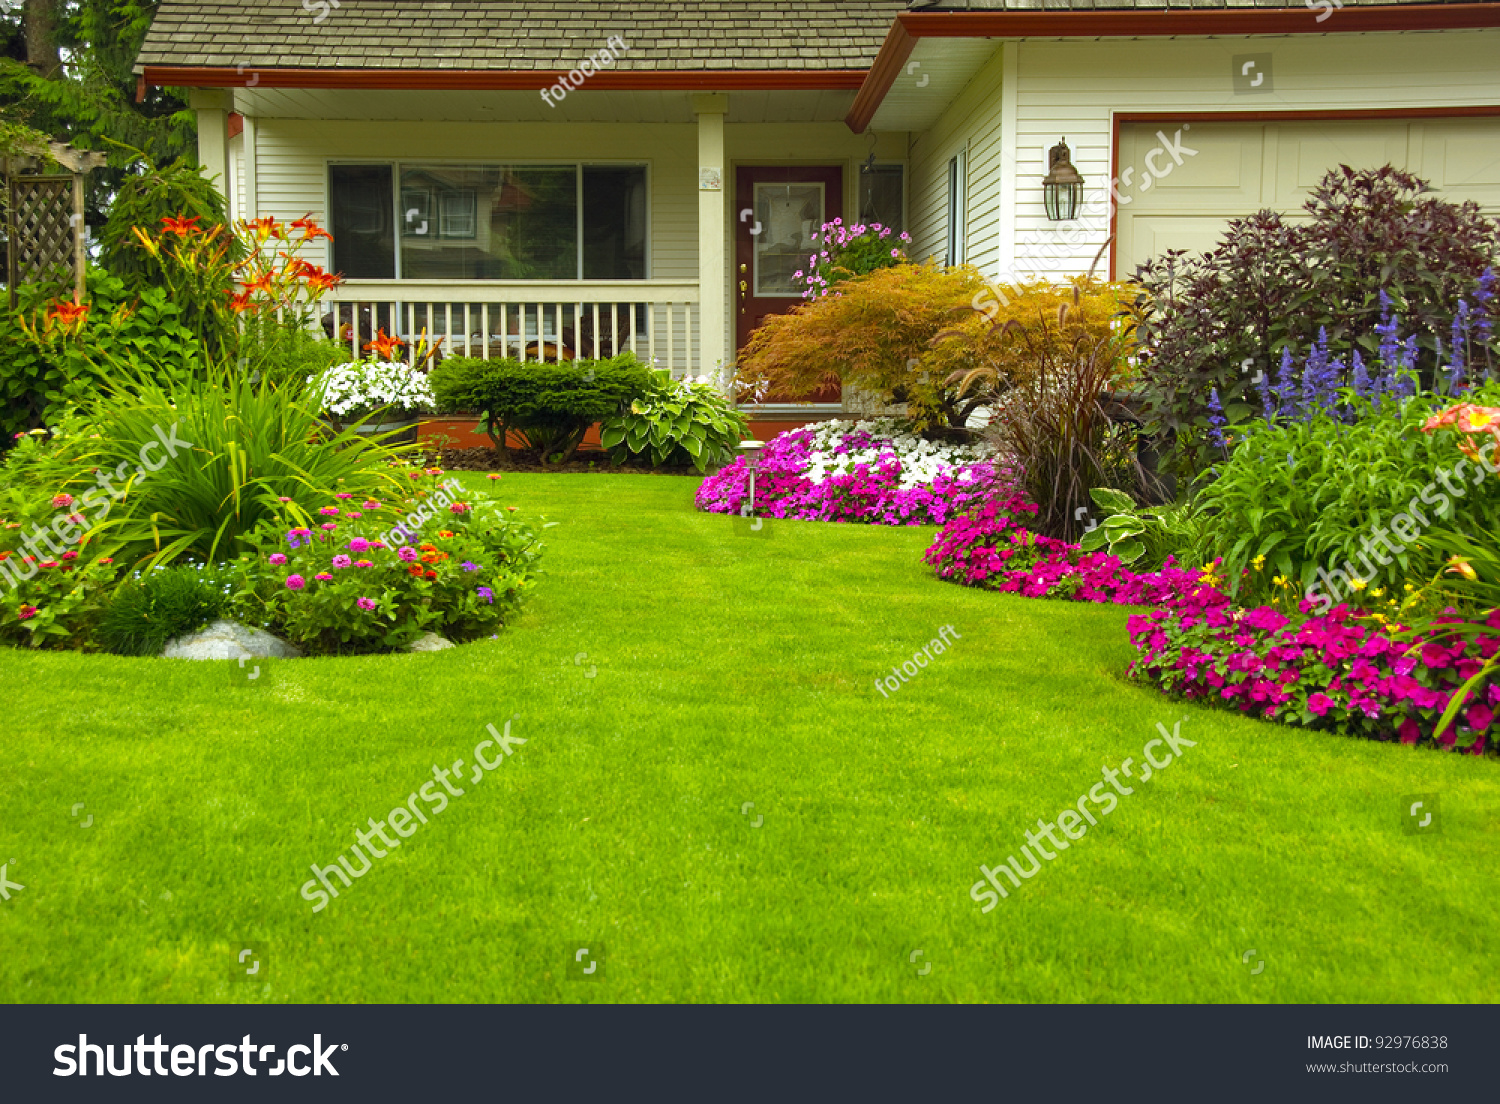 Manicured House and Garden displaying annual and perennial gardens in full bloom. #92976838